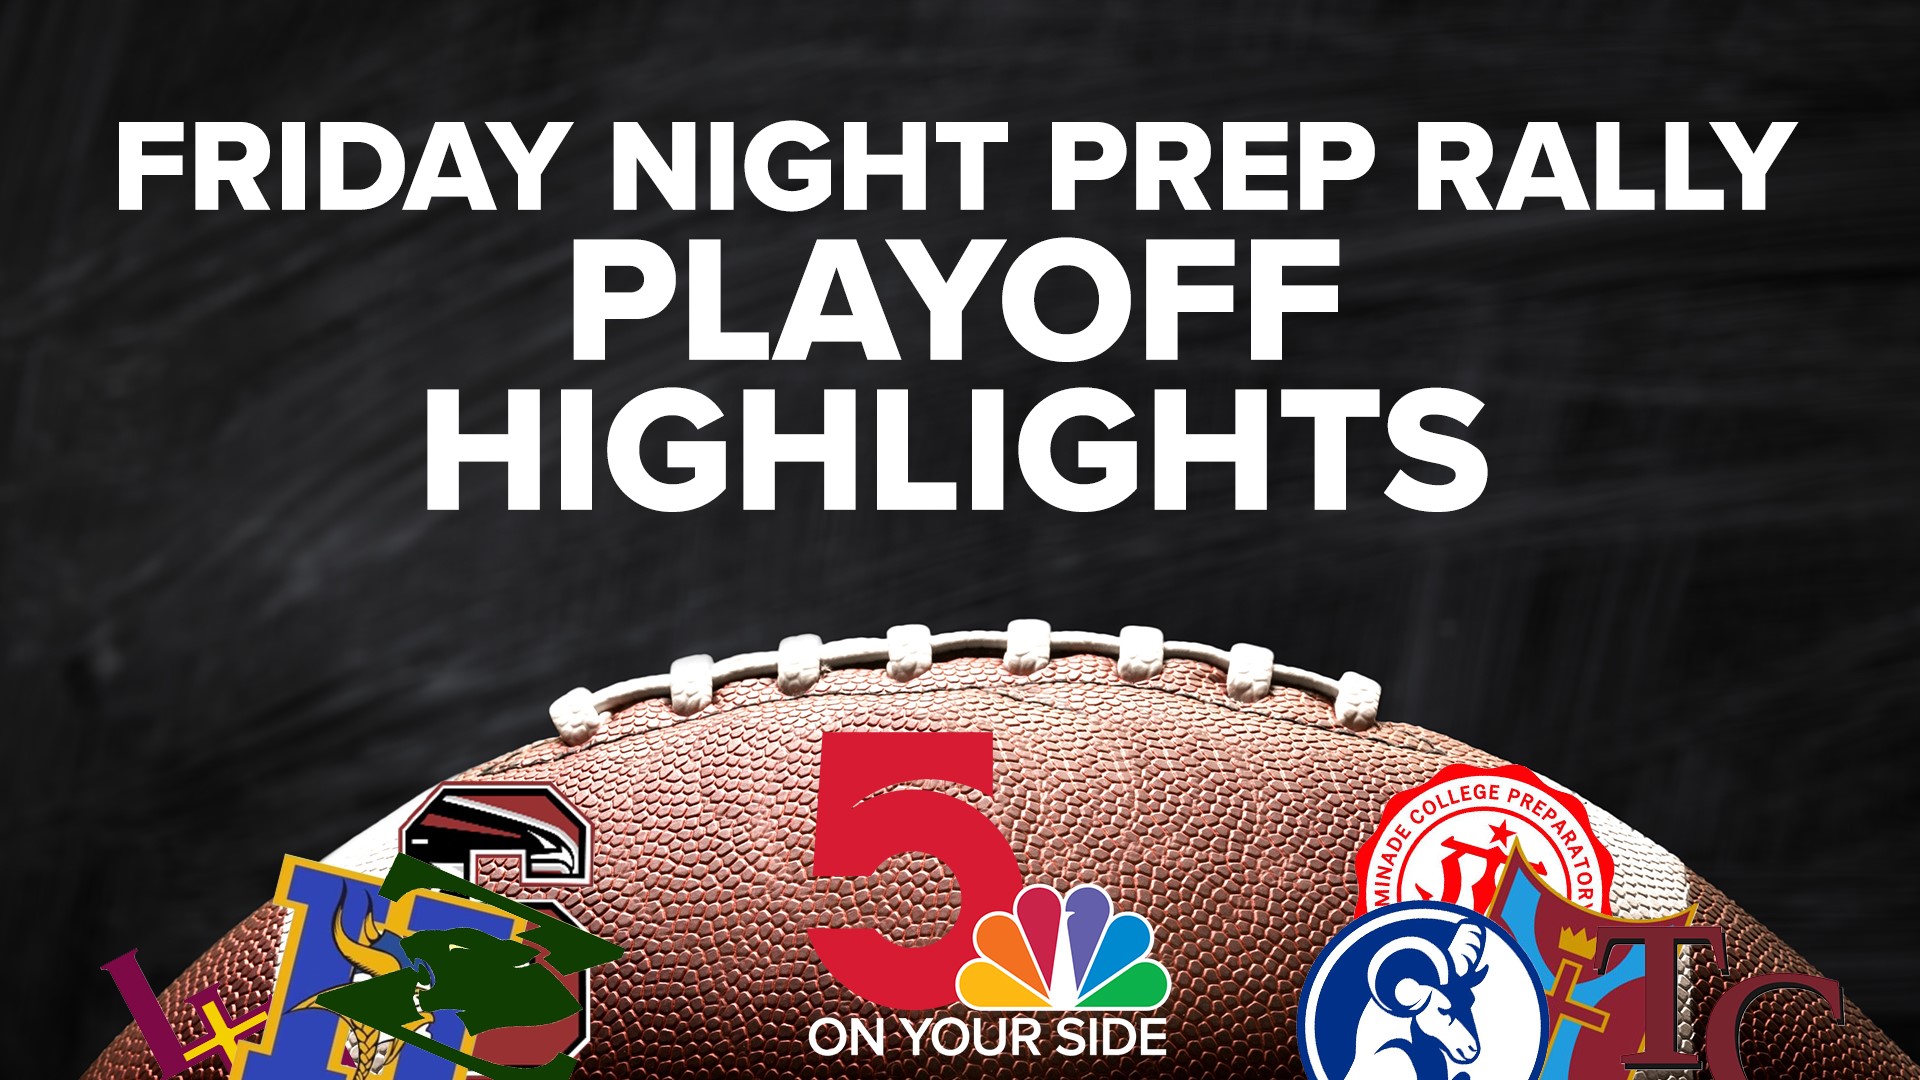 Did you miss any local high school playoff highlights this week? No problem! We've got all the biggest games right here.